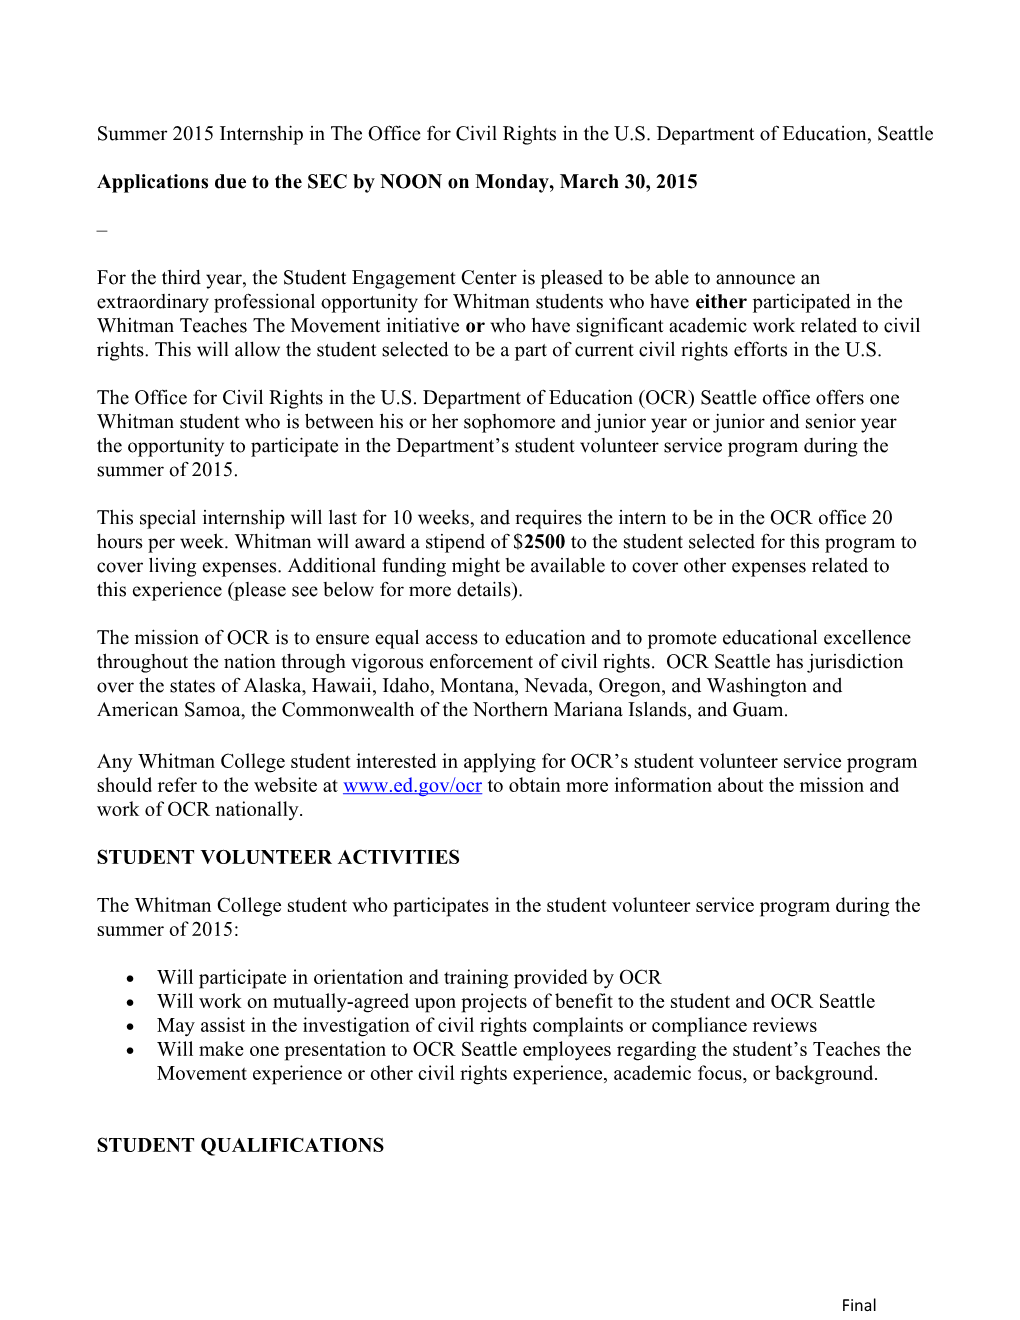 Summer 2015 Internship in Theoffice for Civil Rights in the U.S. Department of Education